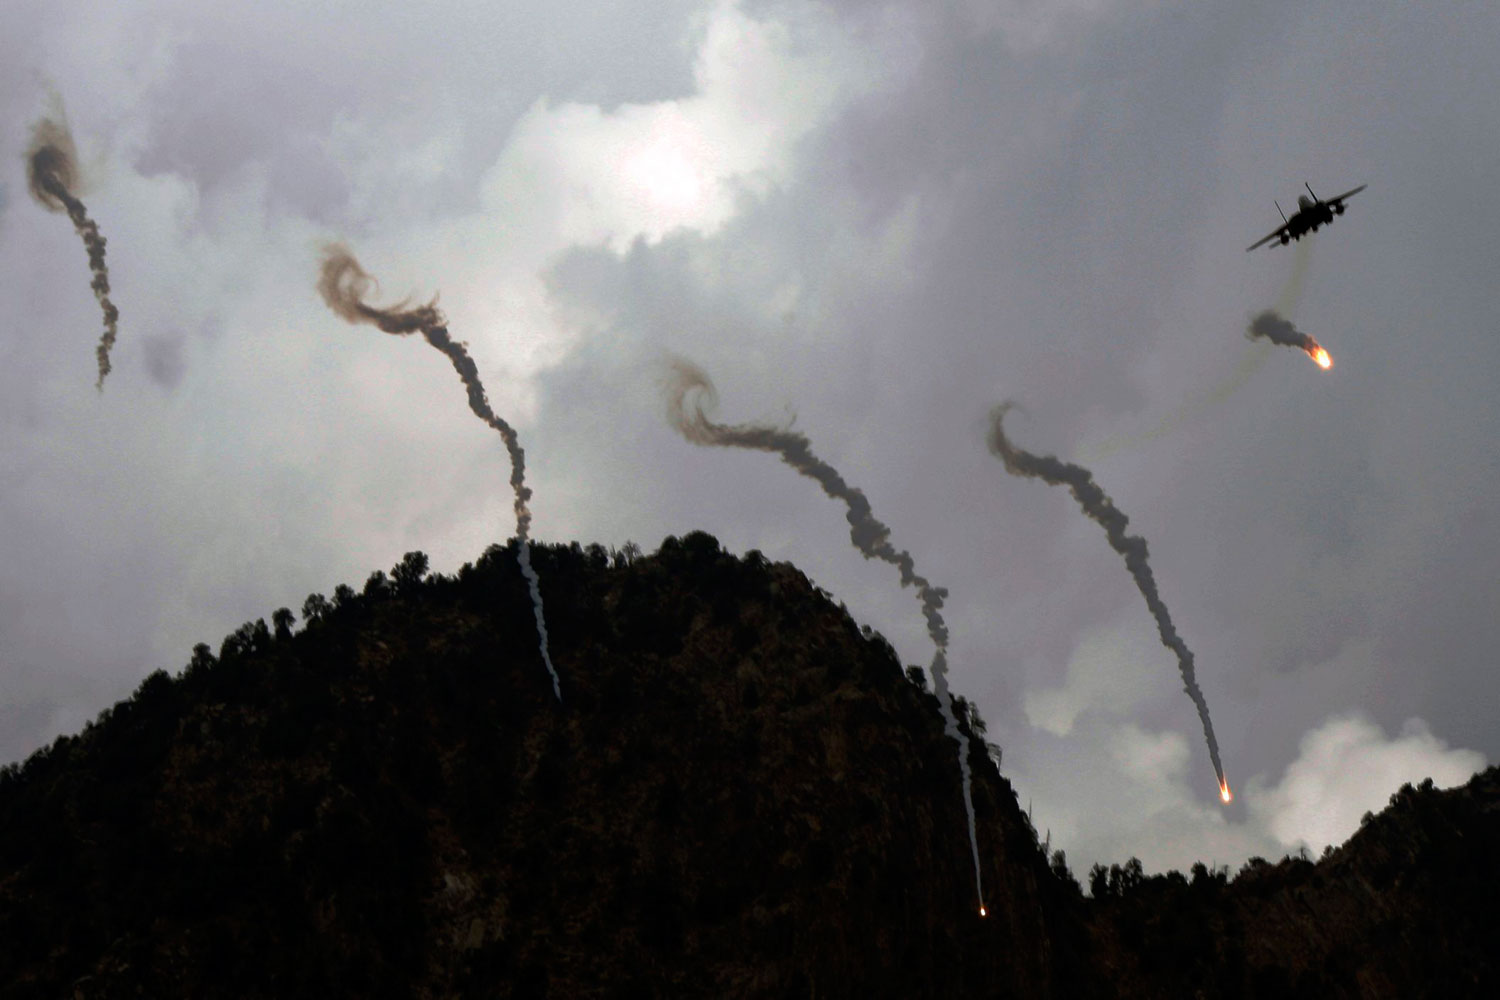 August 28, 2011. A U.S. F-15 fighter fires flares after striking Taliban insurgents in Kunar province in Afghanistan. After Taliban forces shot down a helicopter, killing 30 American soldiers, August became the deadliest month for U.S. forces since the war in Afghanistan began a decade ago.